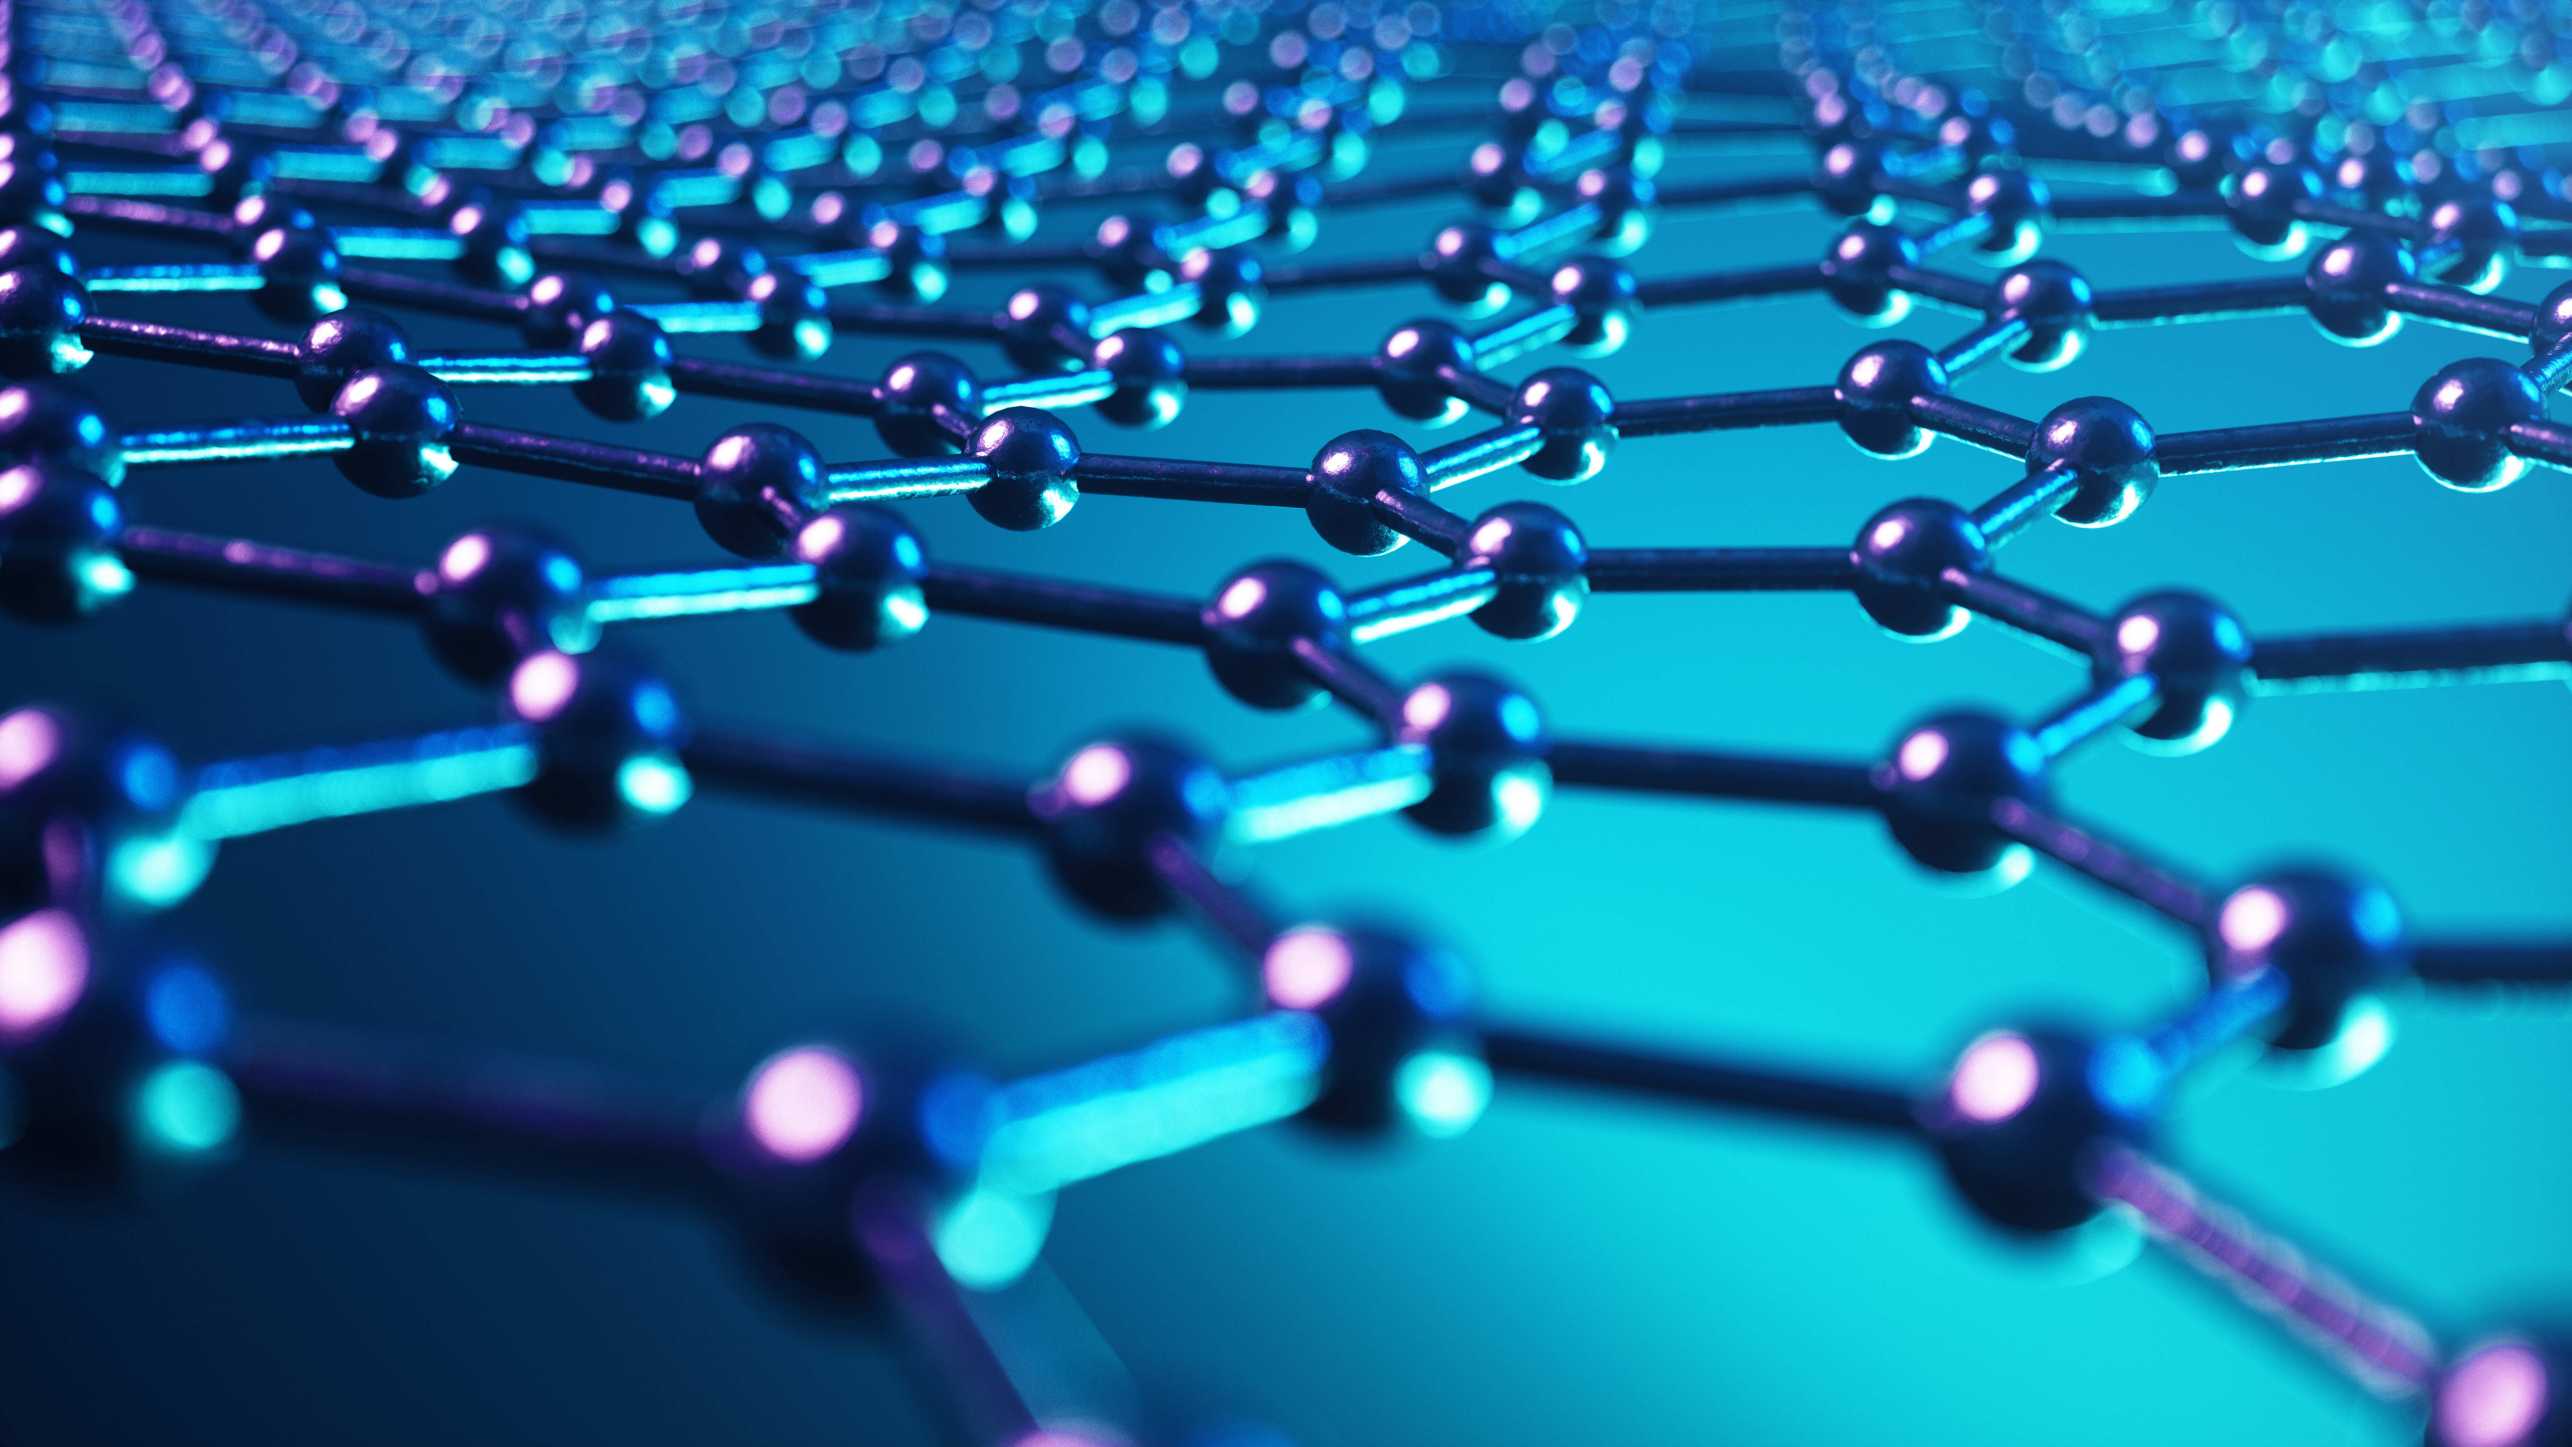 3D illustration of the graphene structure